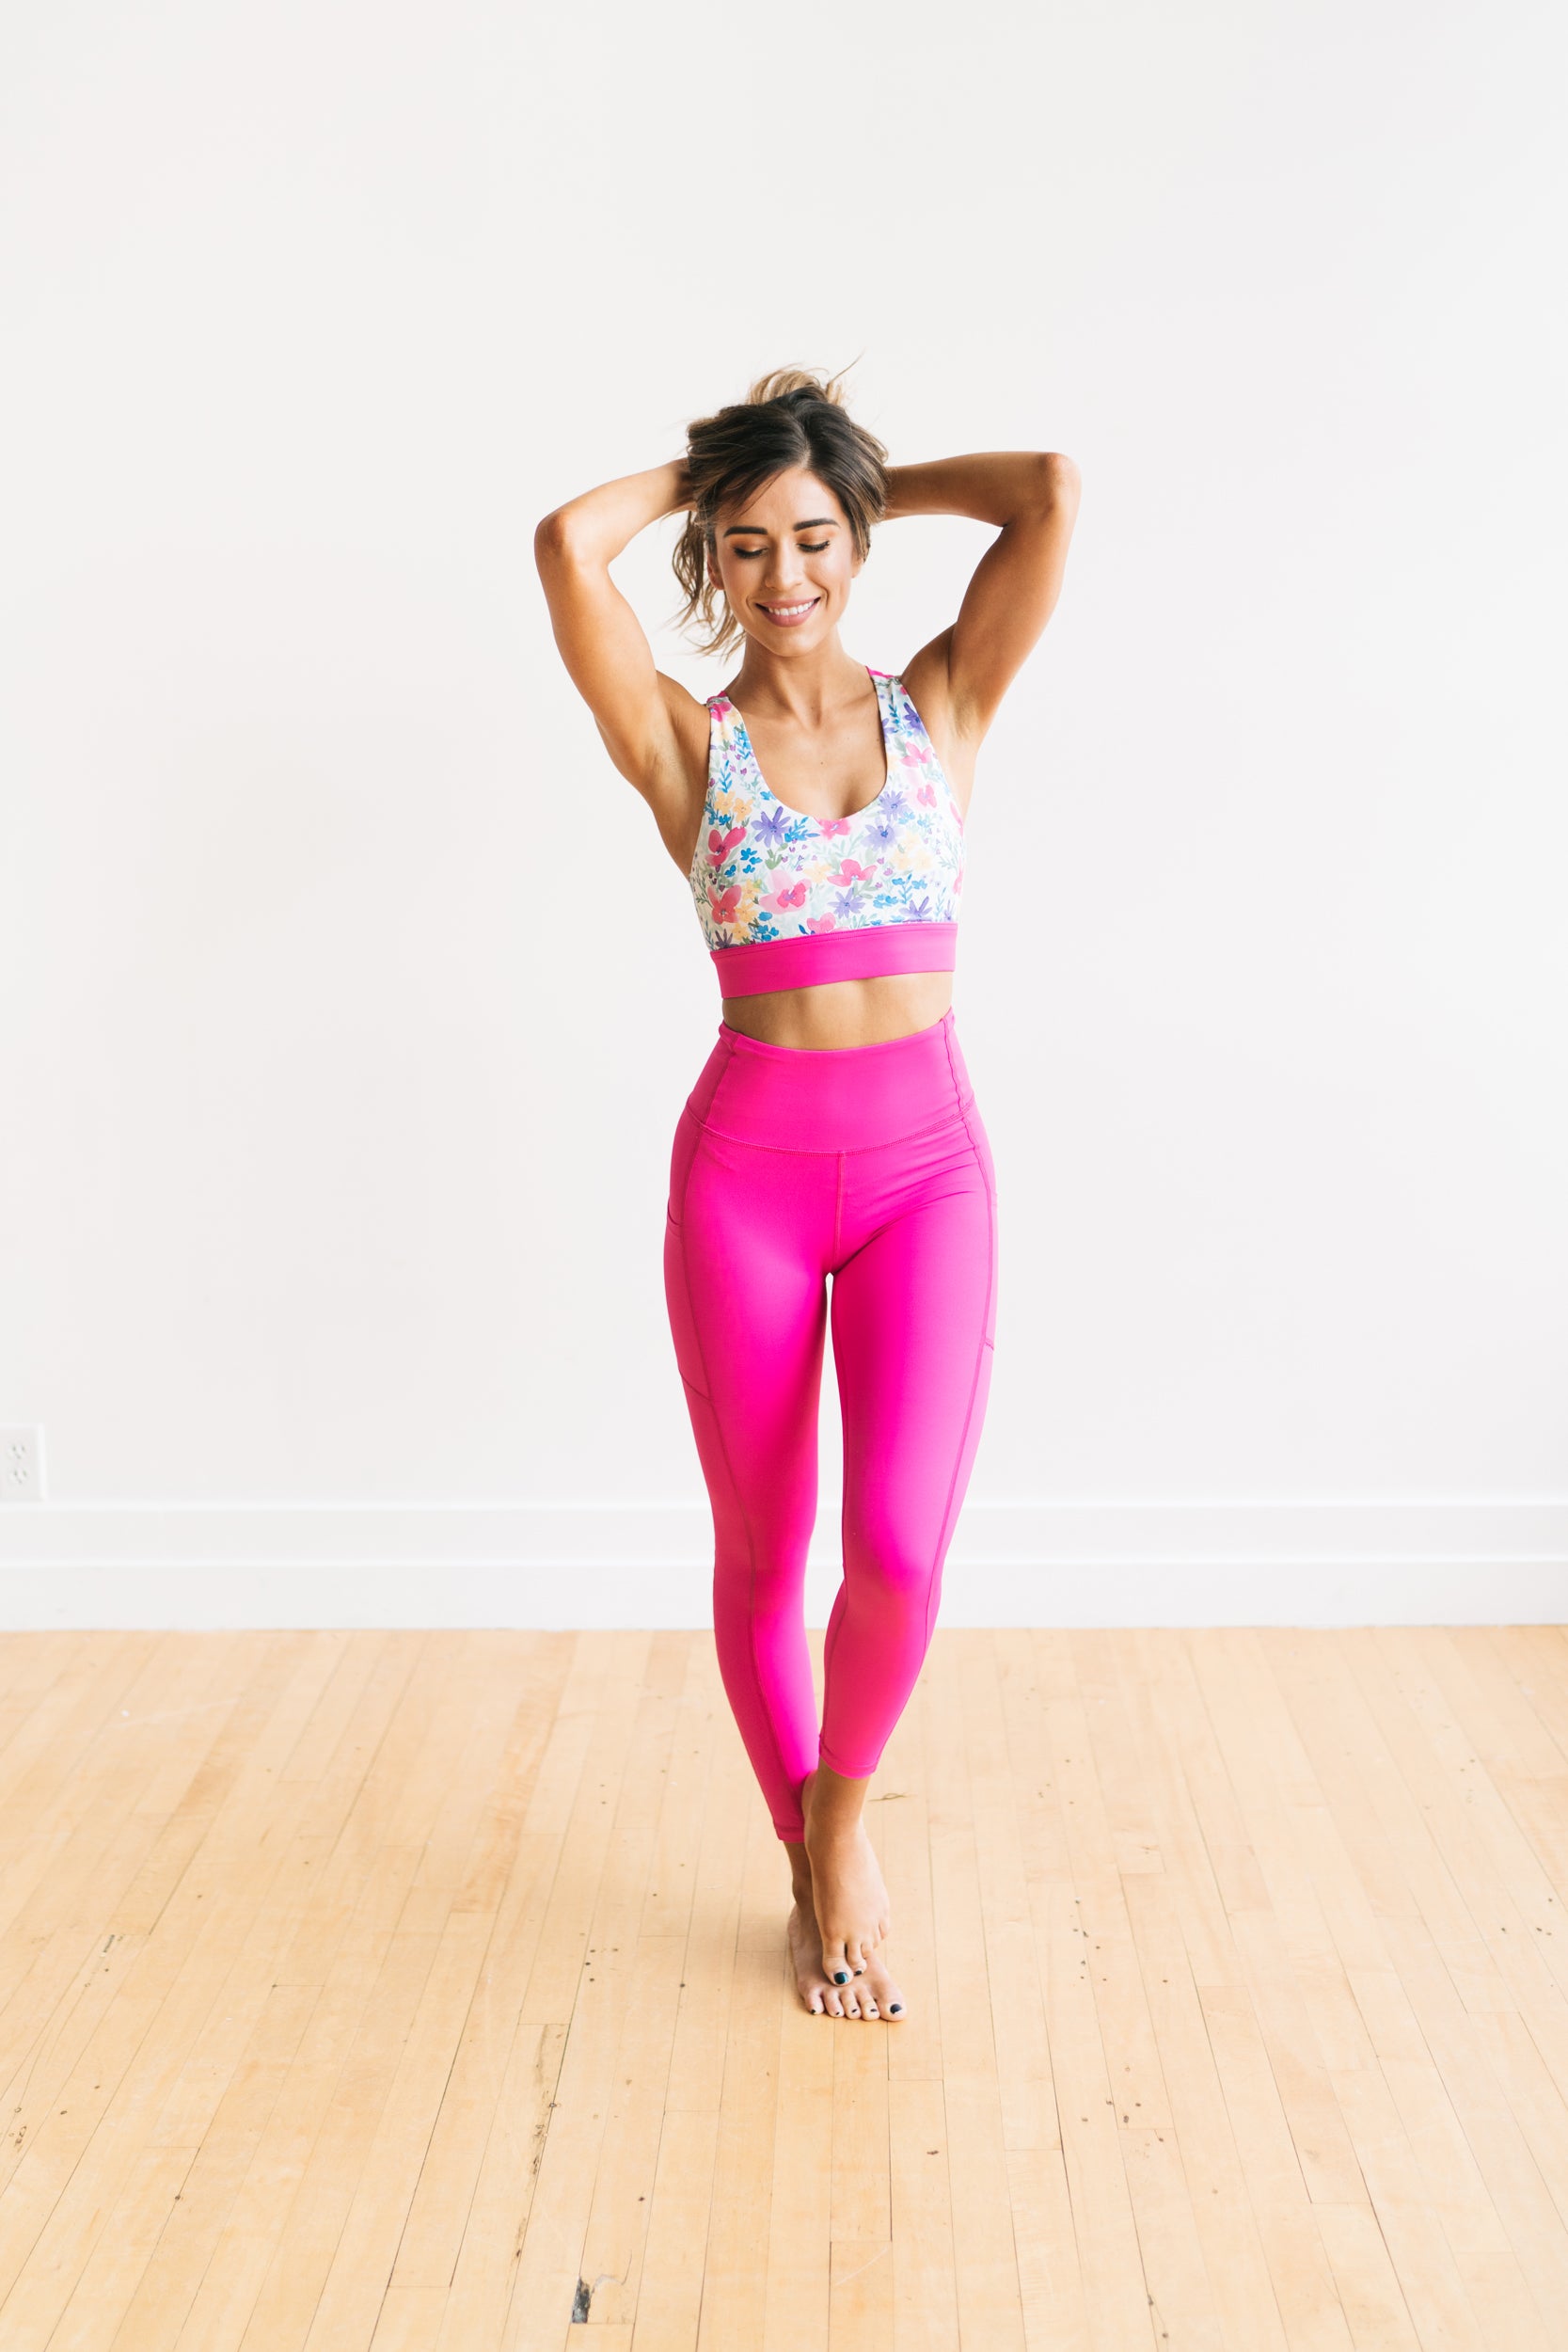 Criss-Cross Sports Bra in color Peach by Chandra Yoga & Active